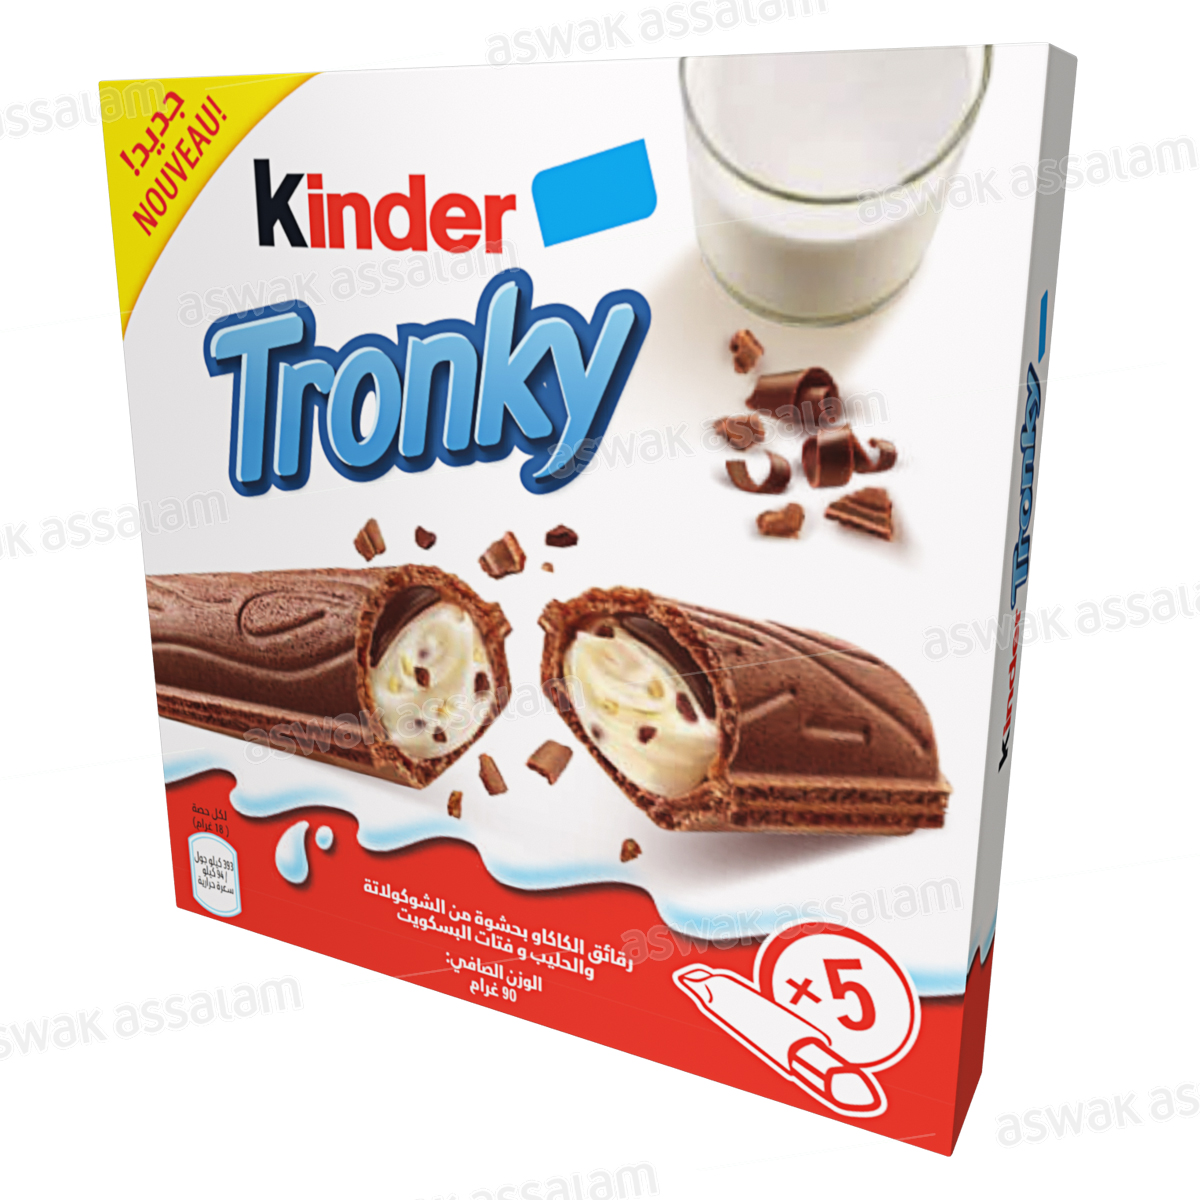 BISCUIT FOURRE CHOCOLAT & CREME 5*18G TRONKY KINDER